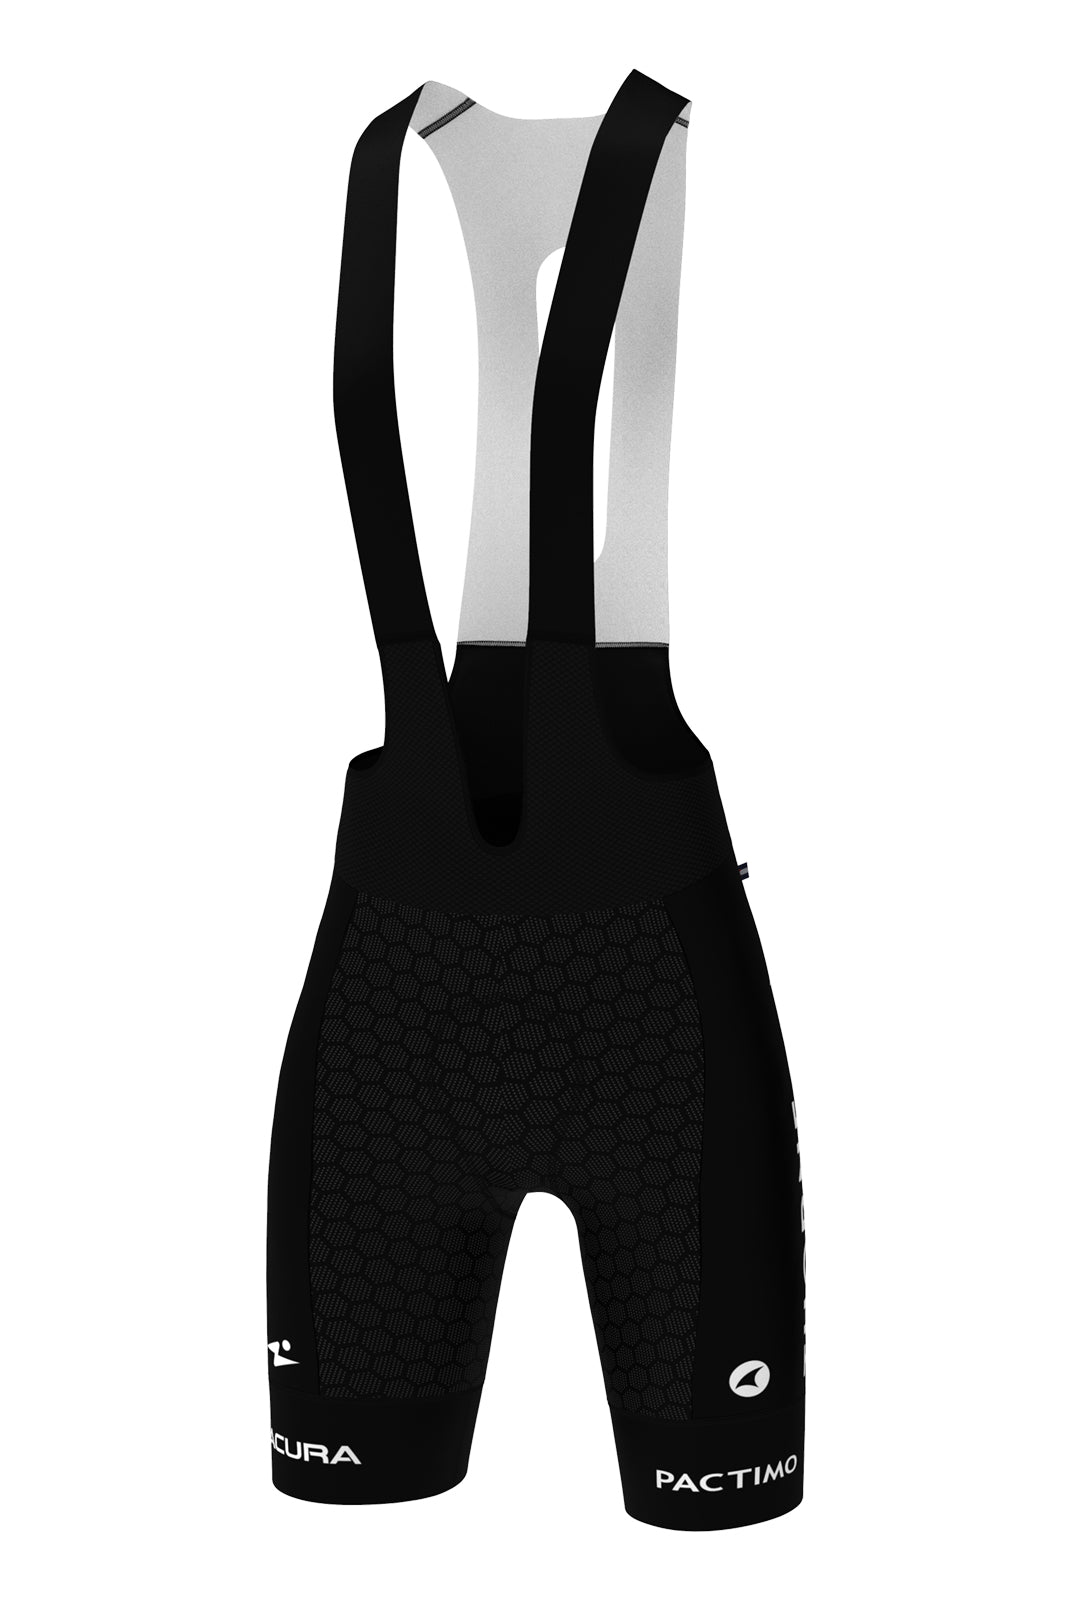 Women's Human Powered Health Long Length Cycling Bibs - Stratos Front View